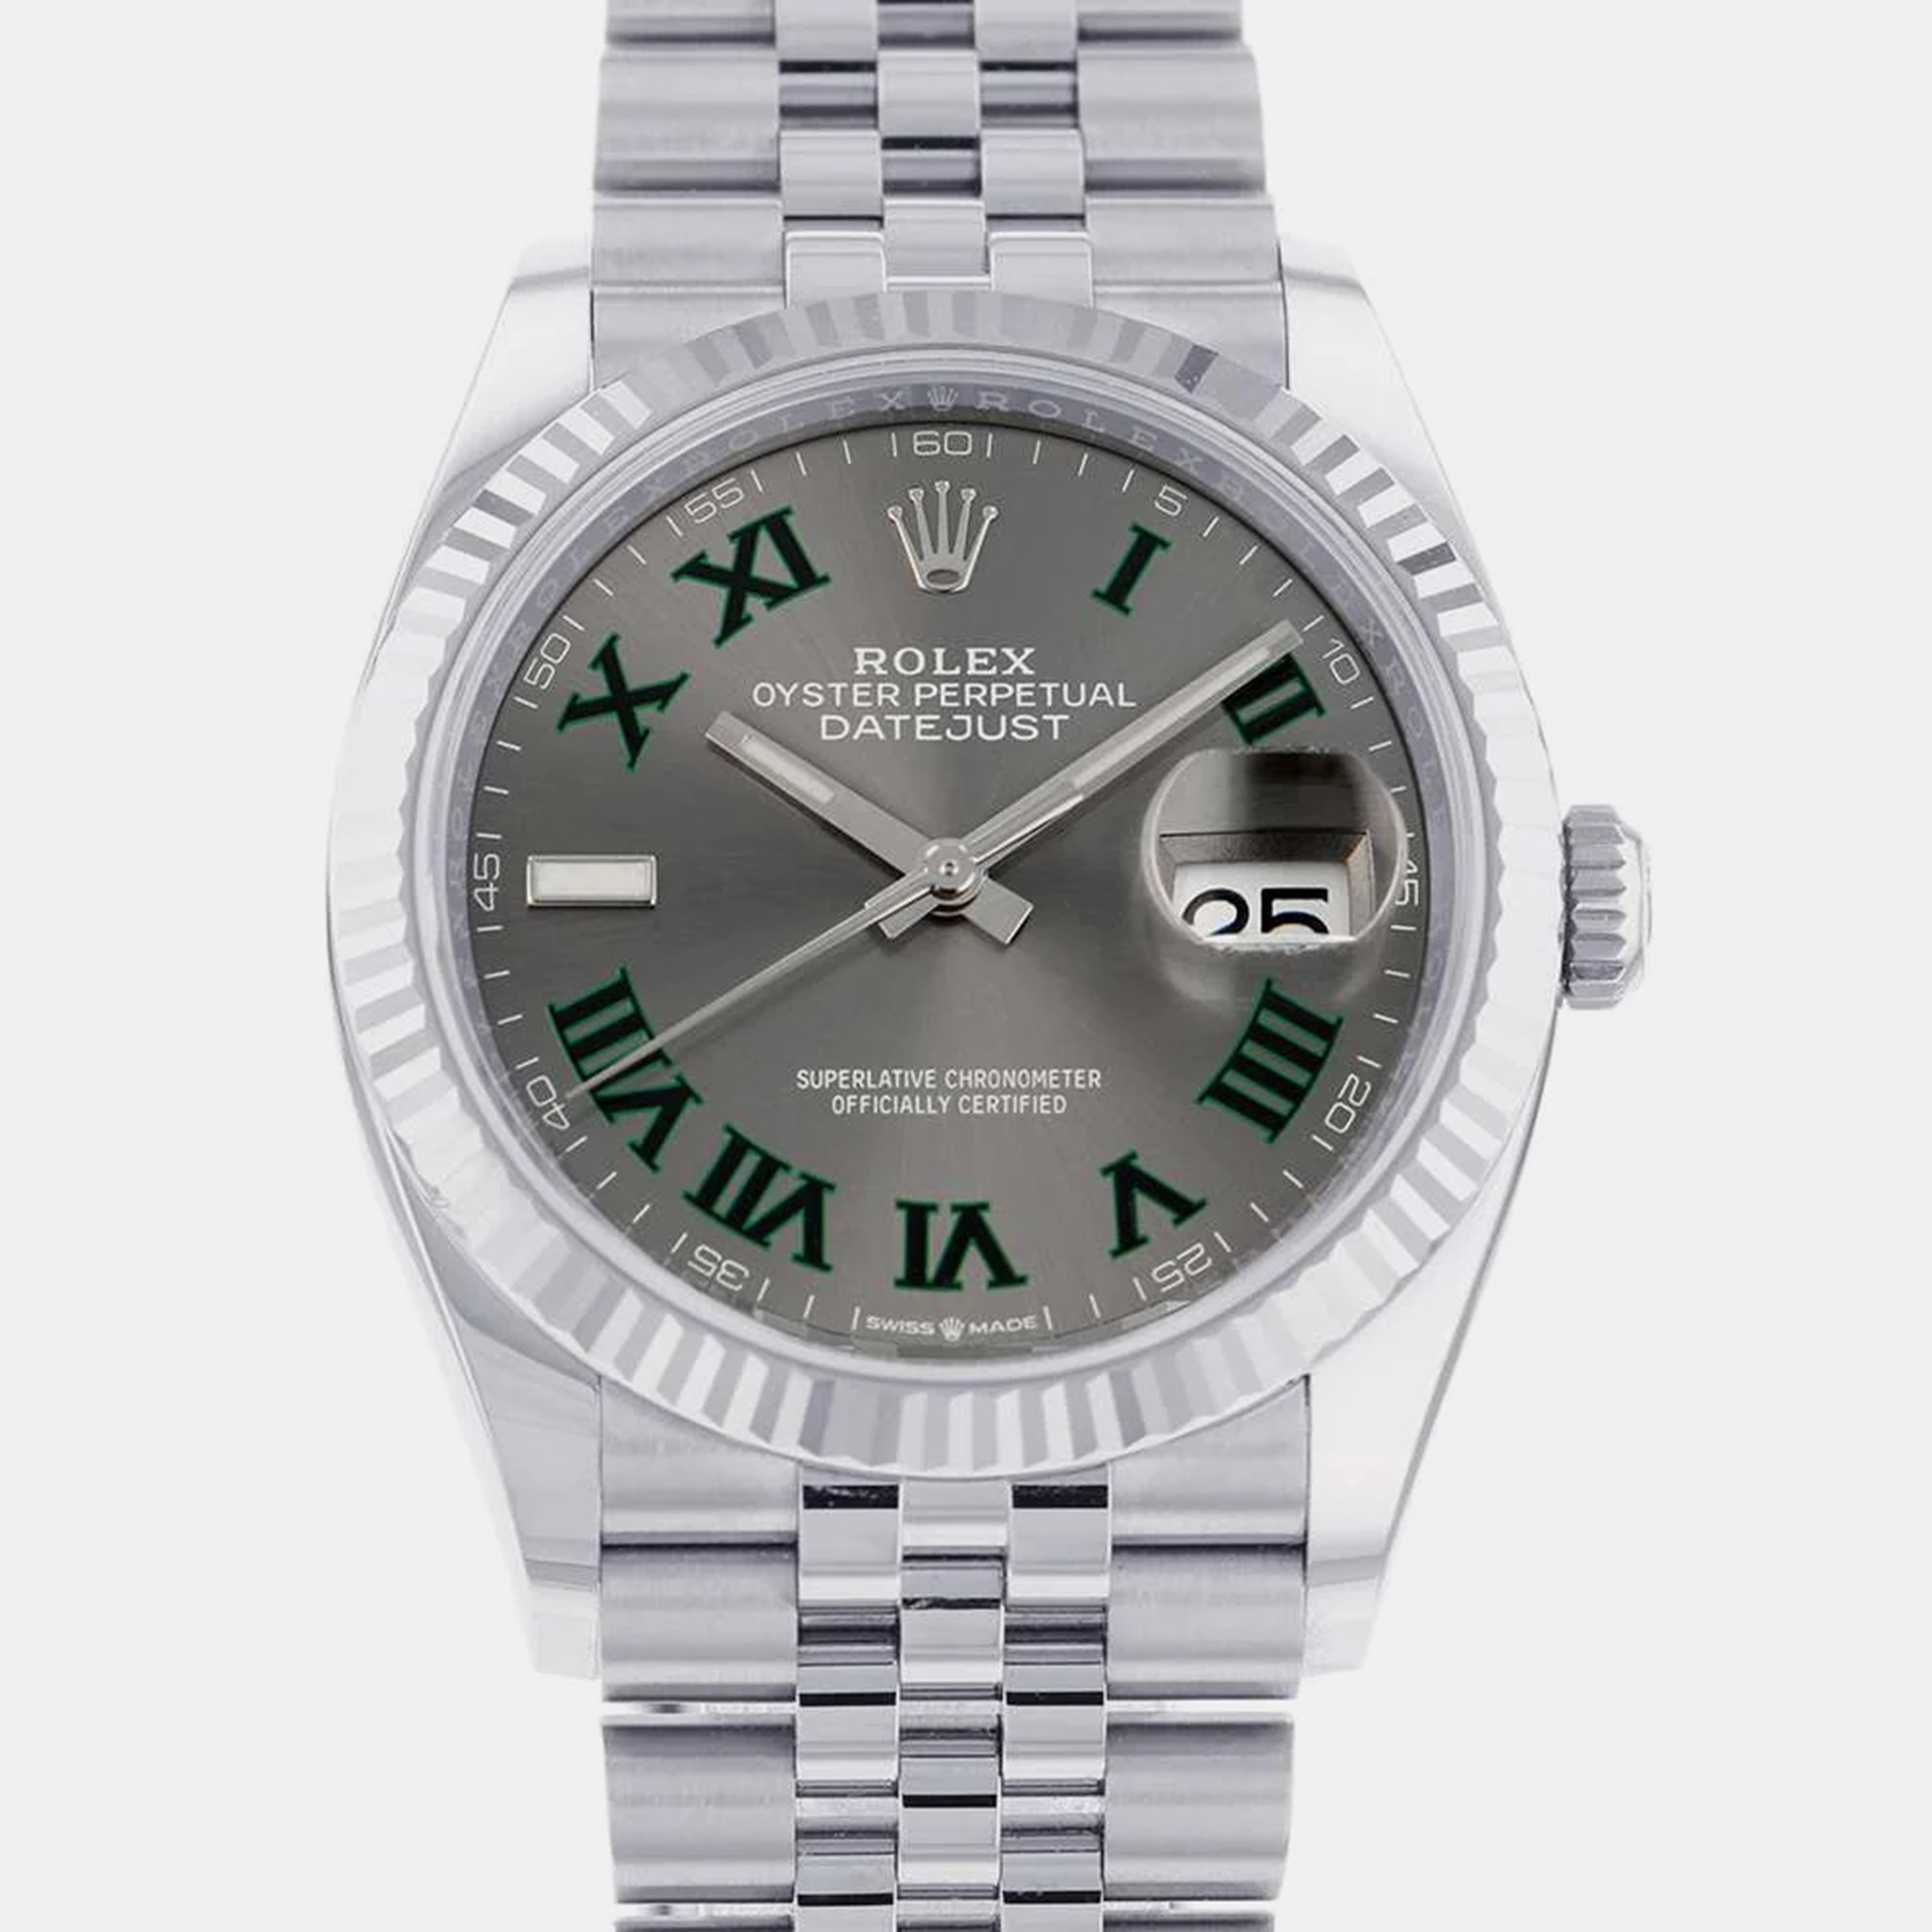 Rolex Grey 18k White Gold And Stainless Steel Datejust 126234 Automatic Men's Wristwatch 36 Mm